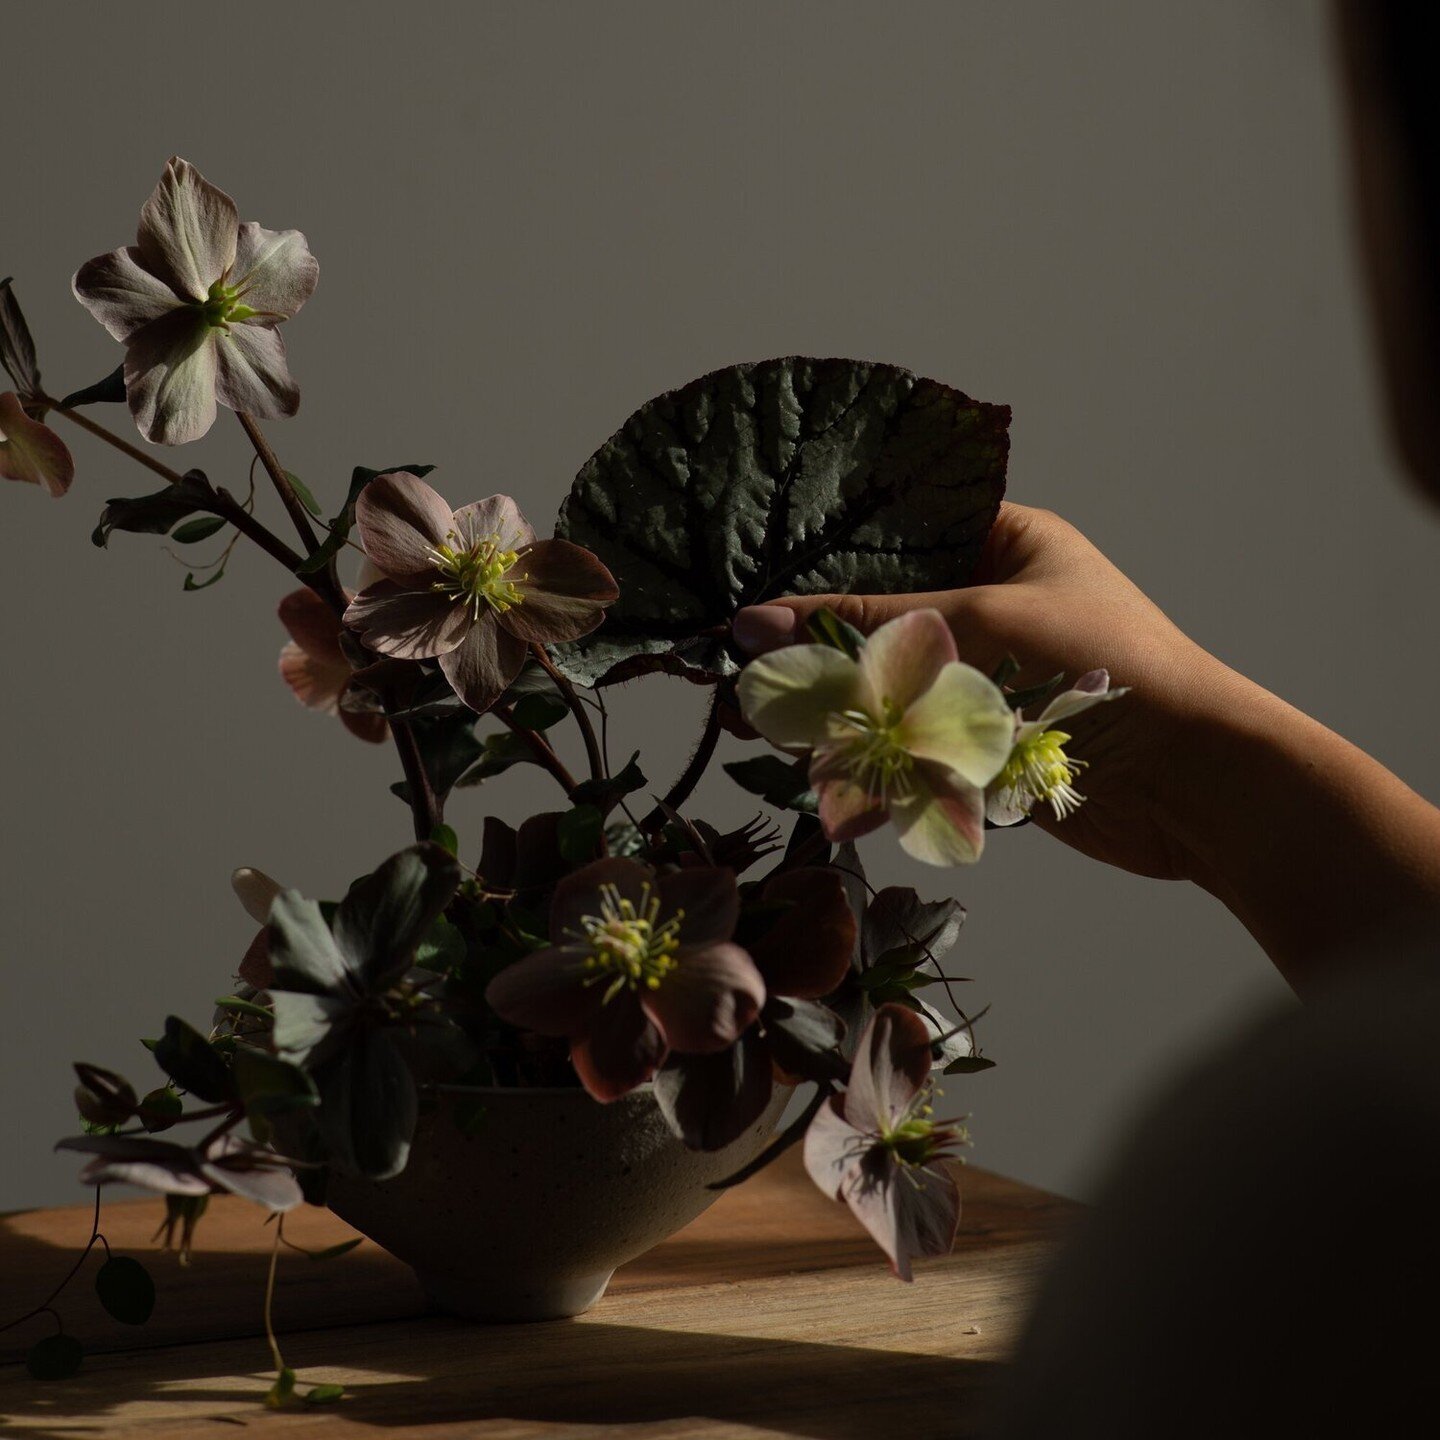 &ldquo;Ikebana is exploring the connection between humankind and the natural world,&rdquo; Luu tells us. &ldquo;When in conversation with natural materials, you are in conversation with Ikebana, whether conscious or not.&rdquo; Each new design or ins